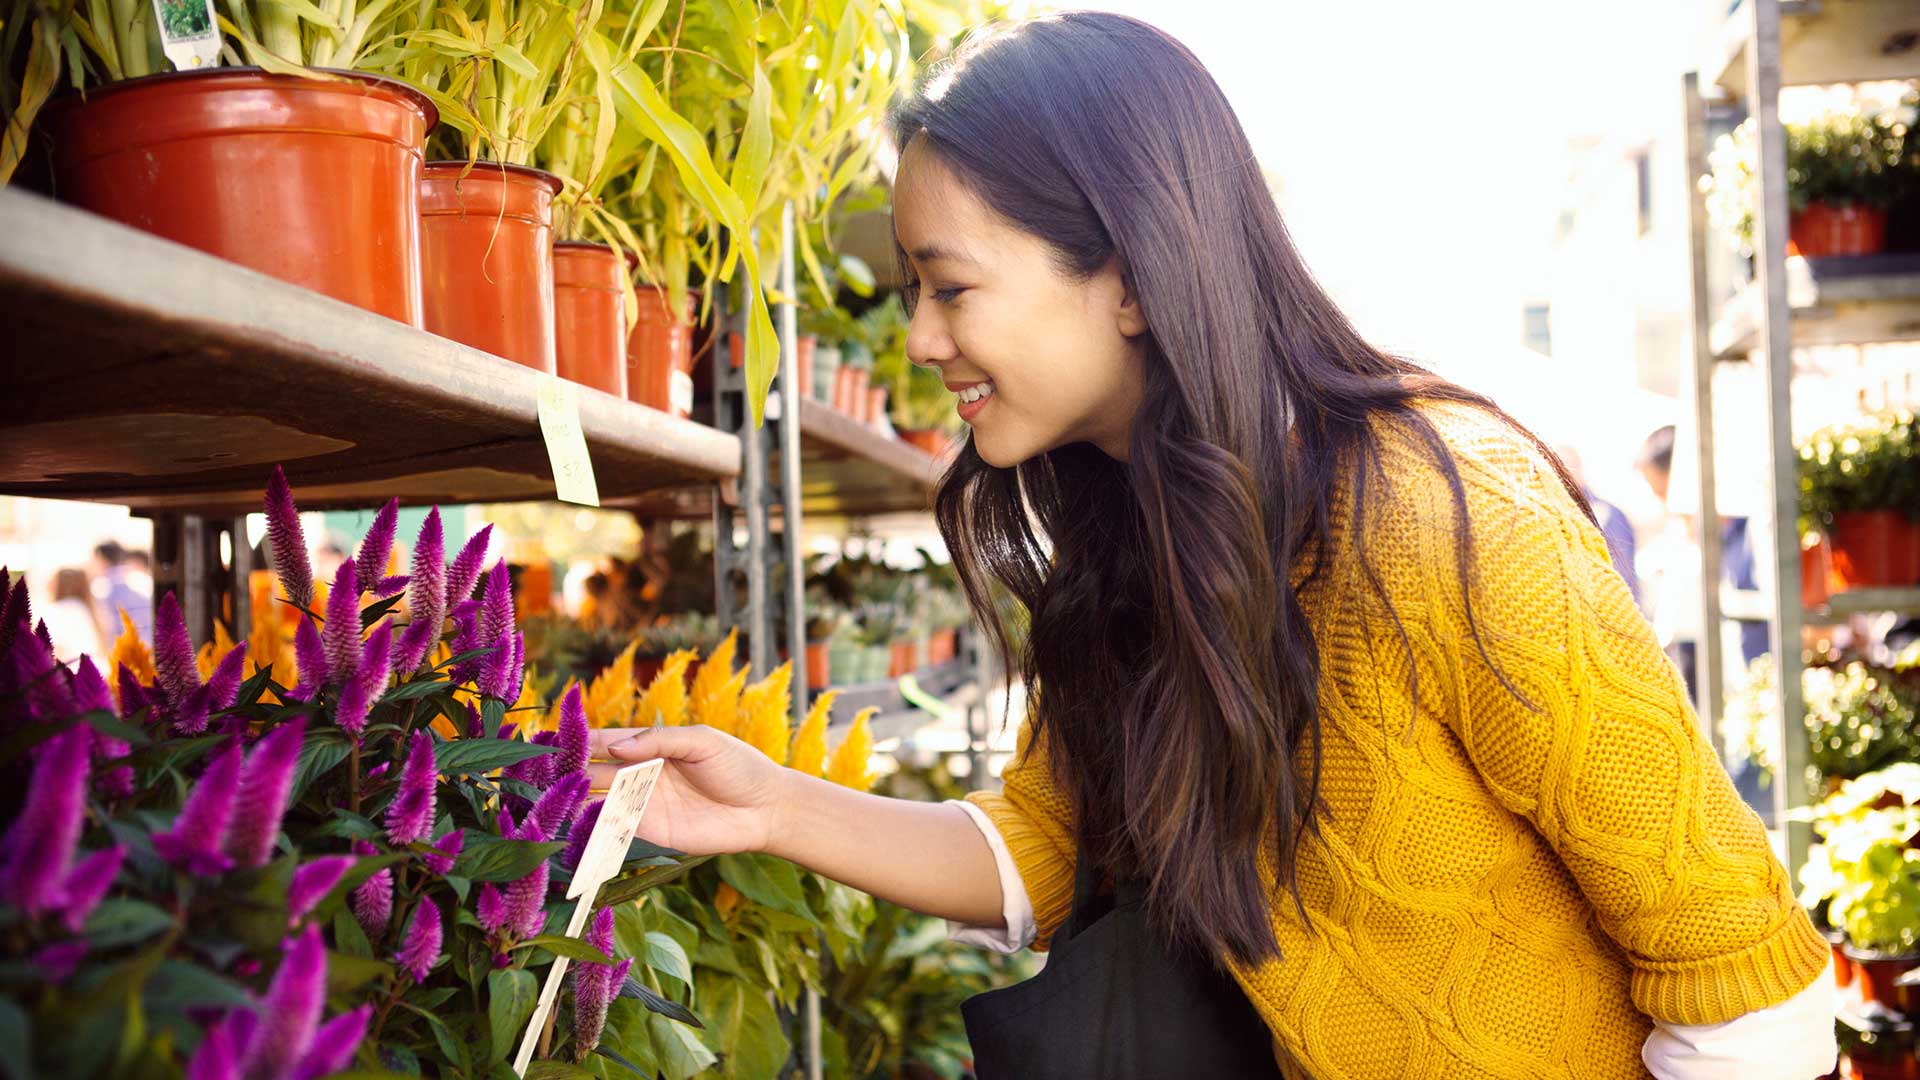 Clerk fiddling with flowers; the image used for making your money work for you